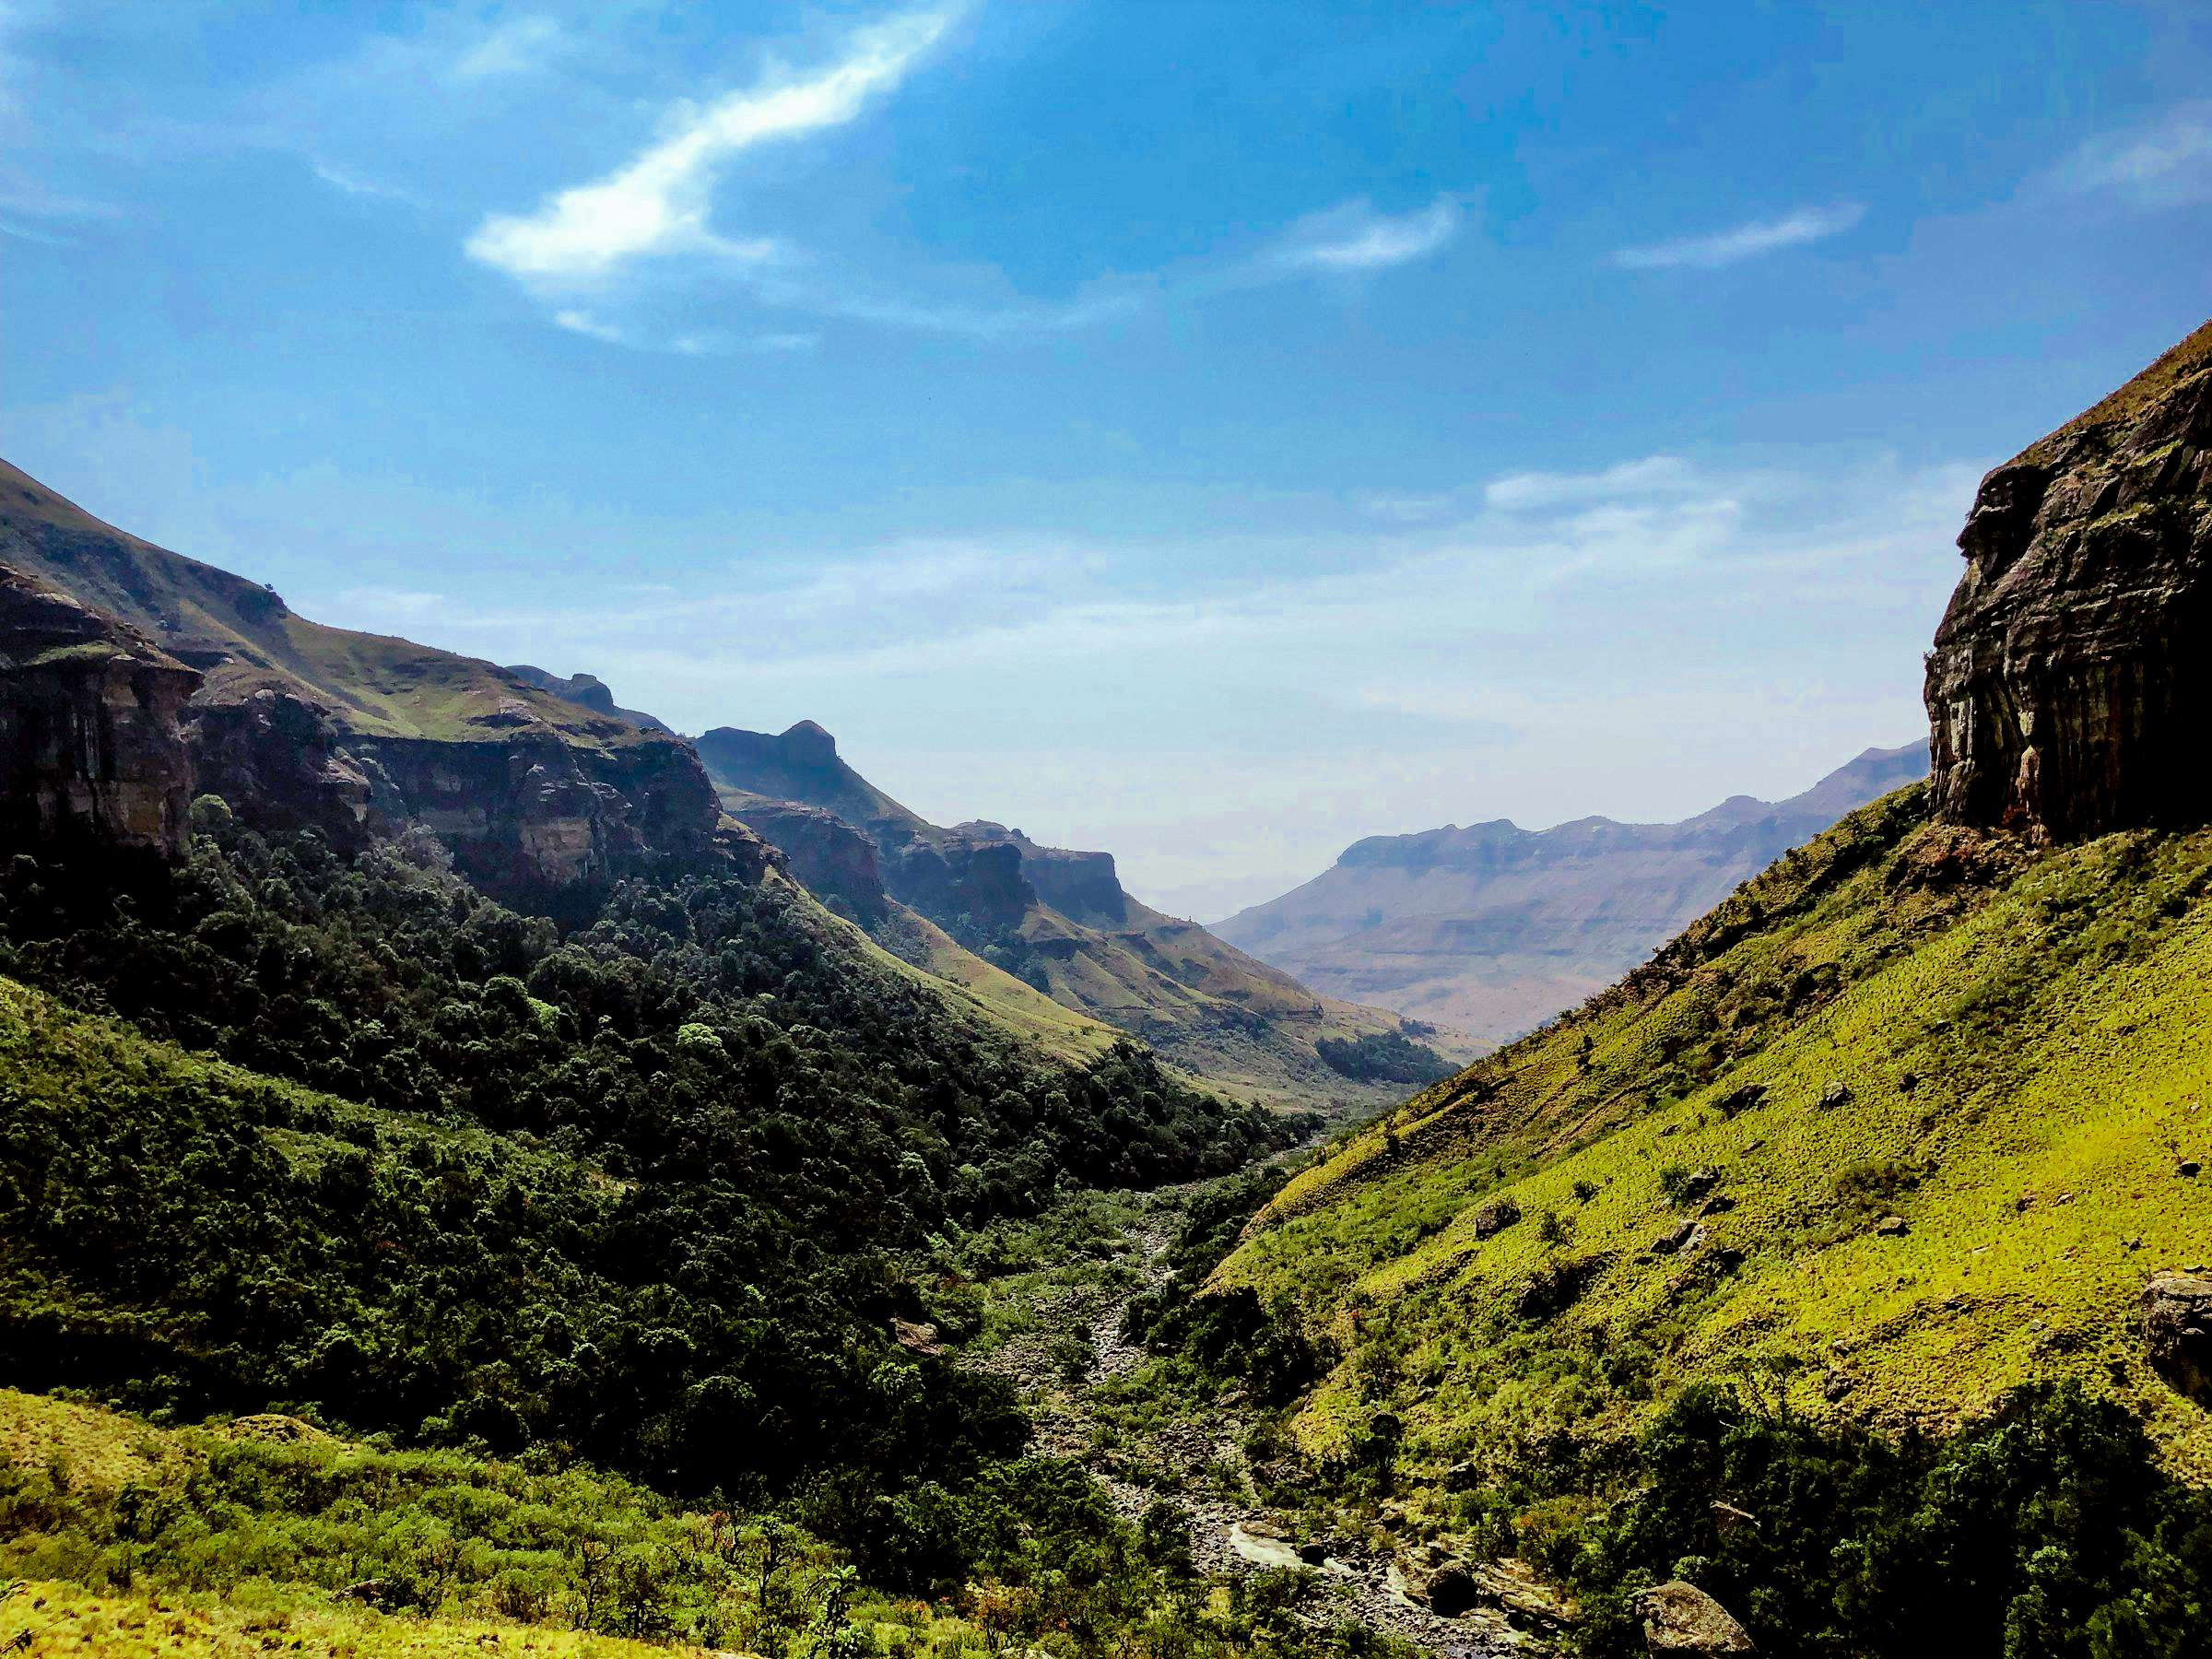 A view of a valley in Kwazulu Natal in South Africa